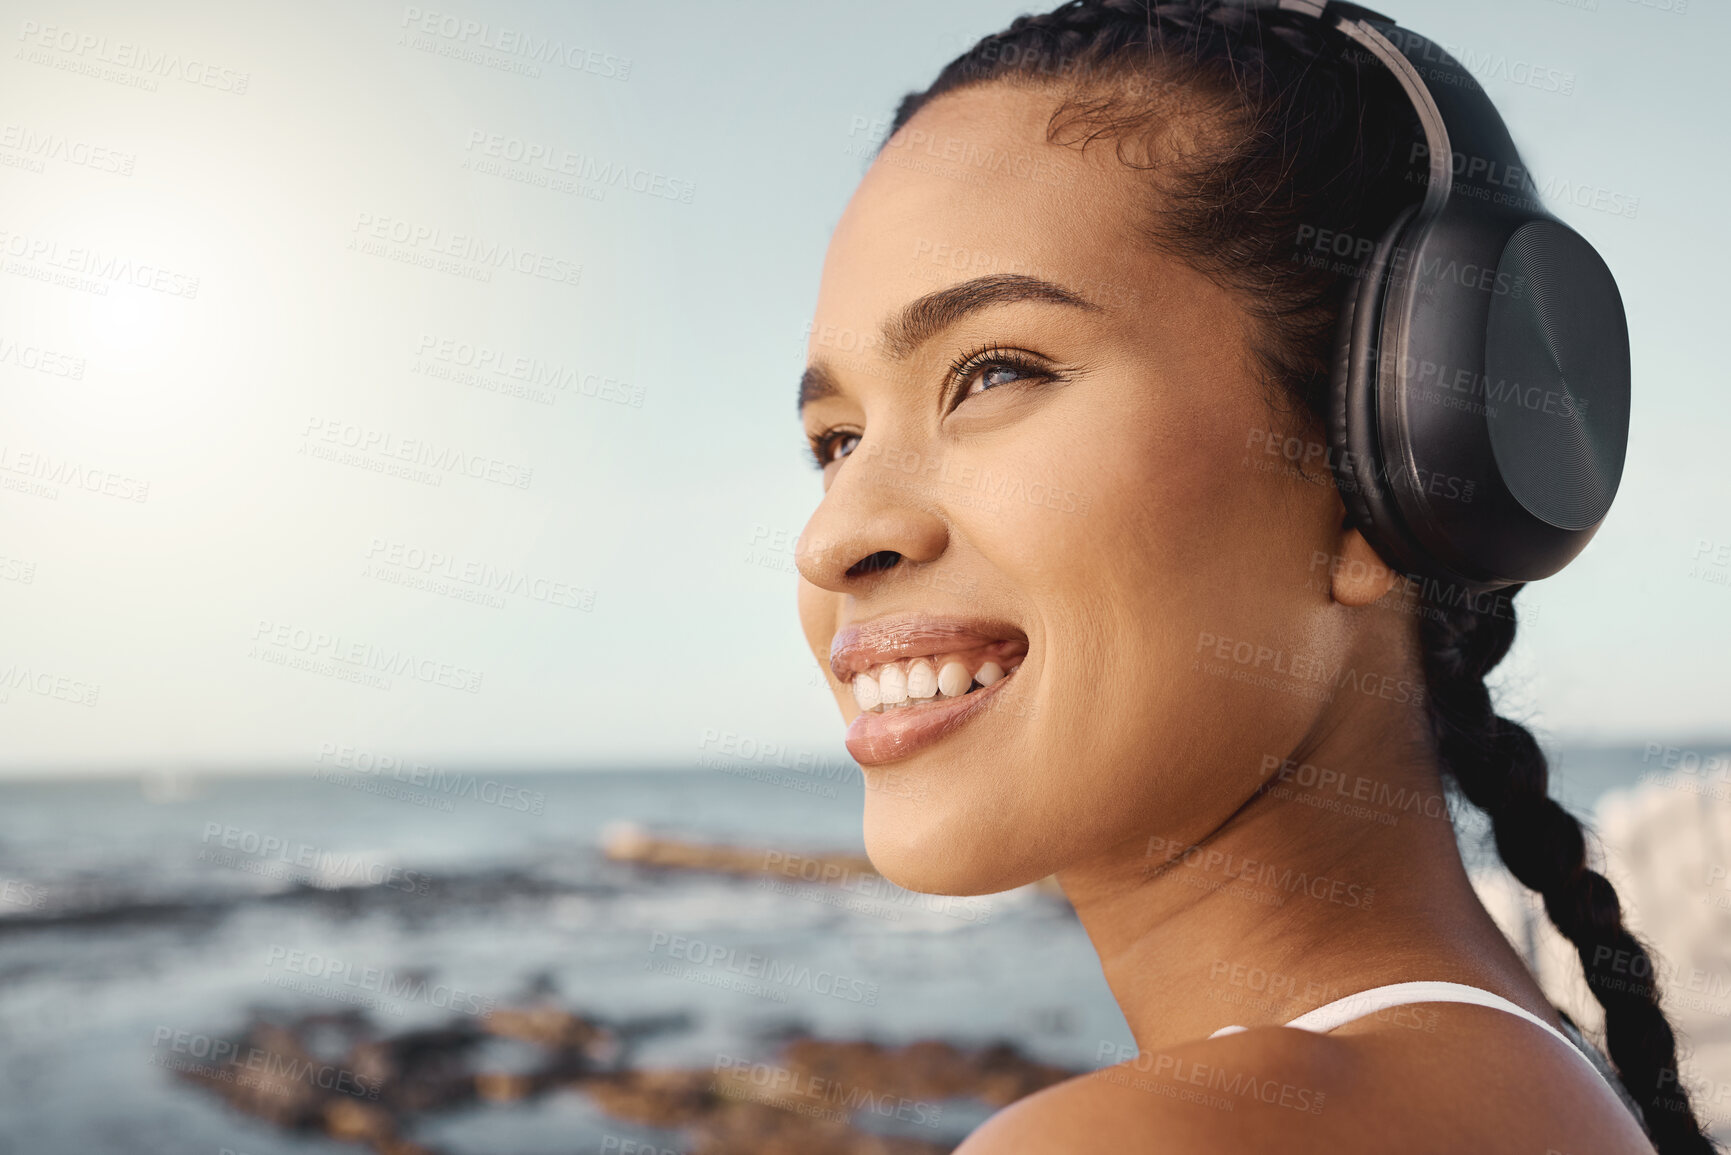 Buy stock photo Headphones, fitness and happy woman at beach for exercise, vision or running mindset, goals or music ideas. Health, podcast and athlete, runner or sports person thinking and listening to audio by sea